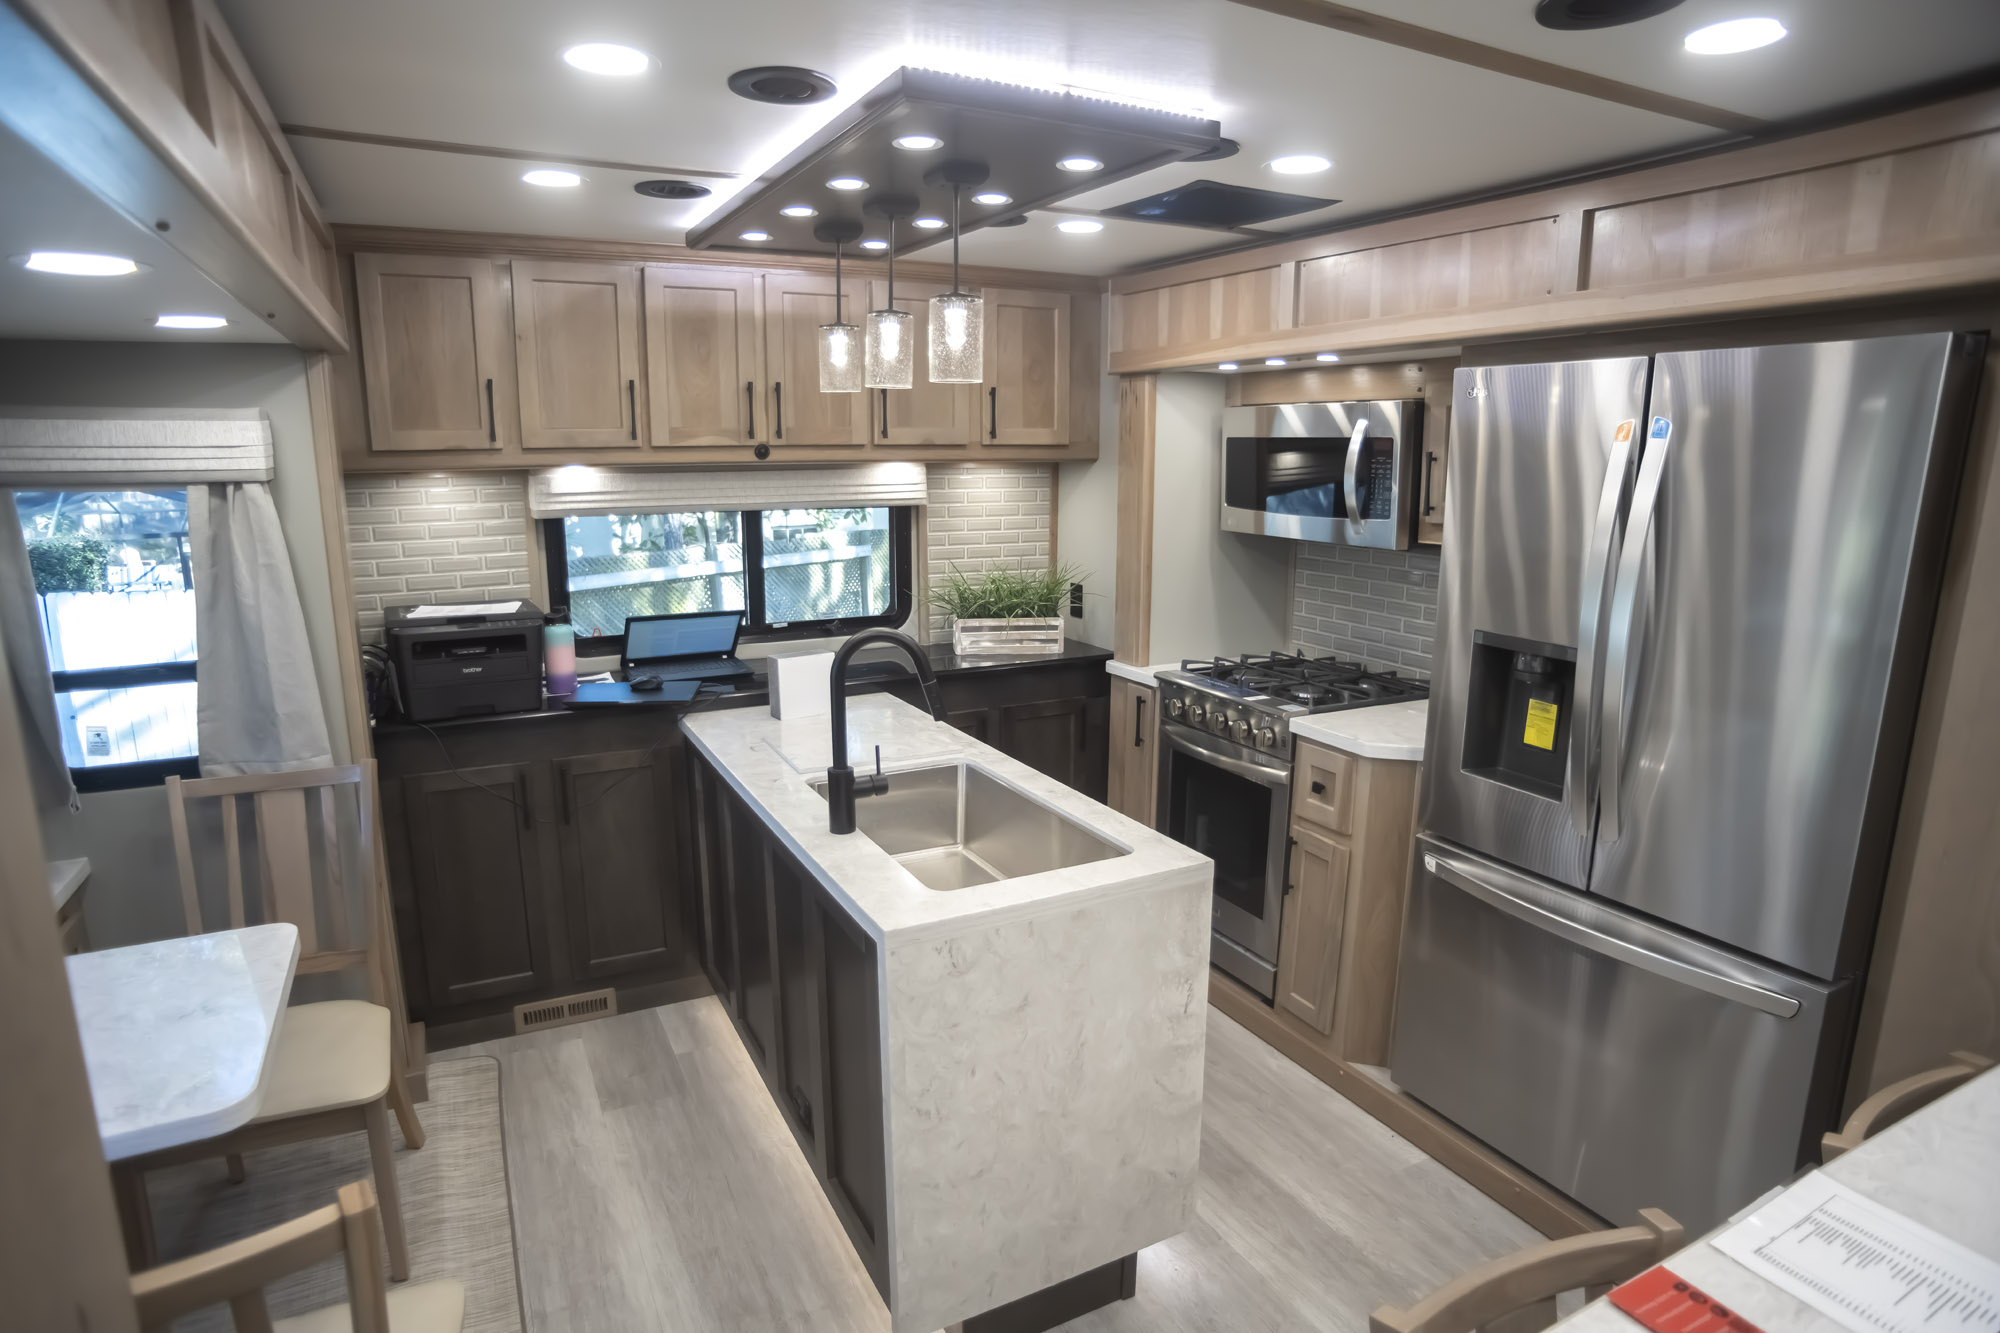 The kitchen of the Luxe Elite 46RKB.